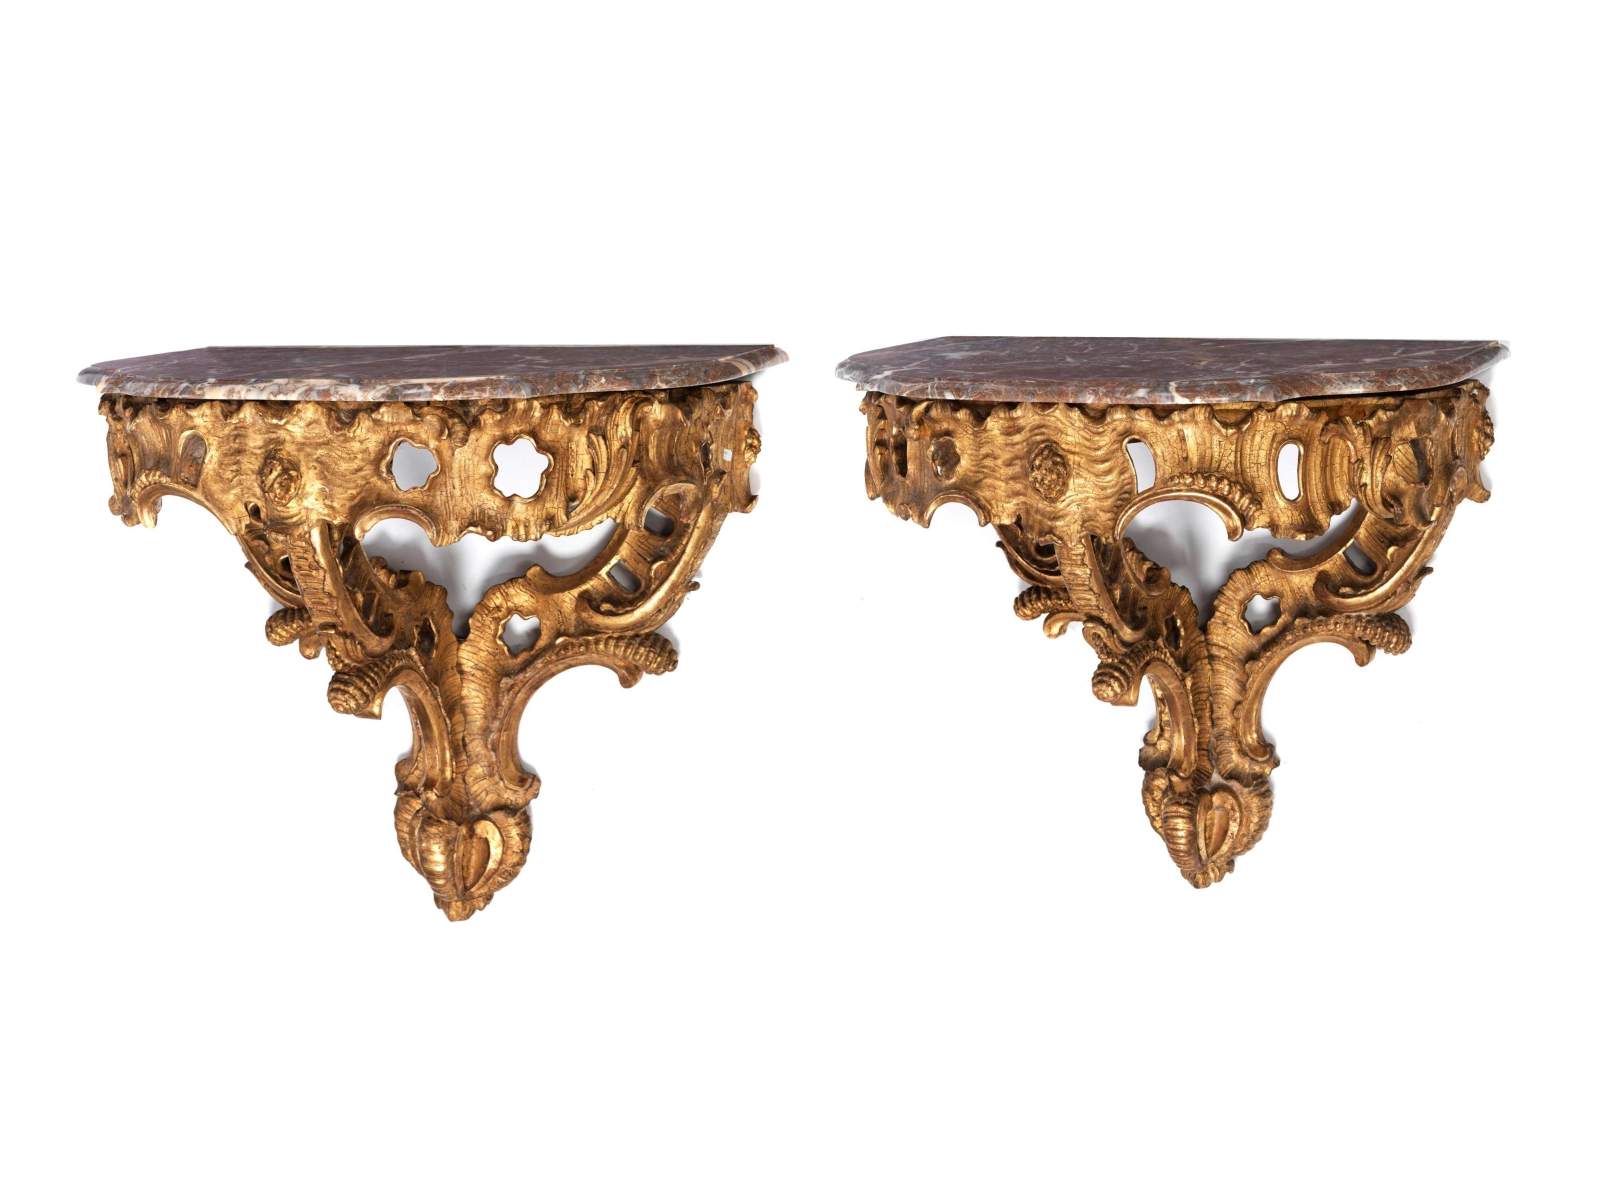 Pair of Rococo wall console tablesHeight: 73 cm. Width: 78 cm. Depth: 50 cm. Probably Germany,